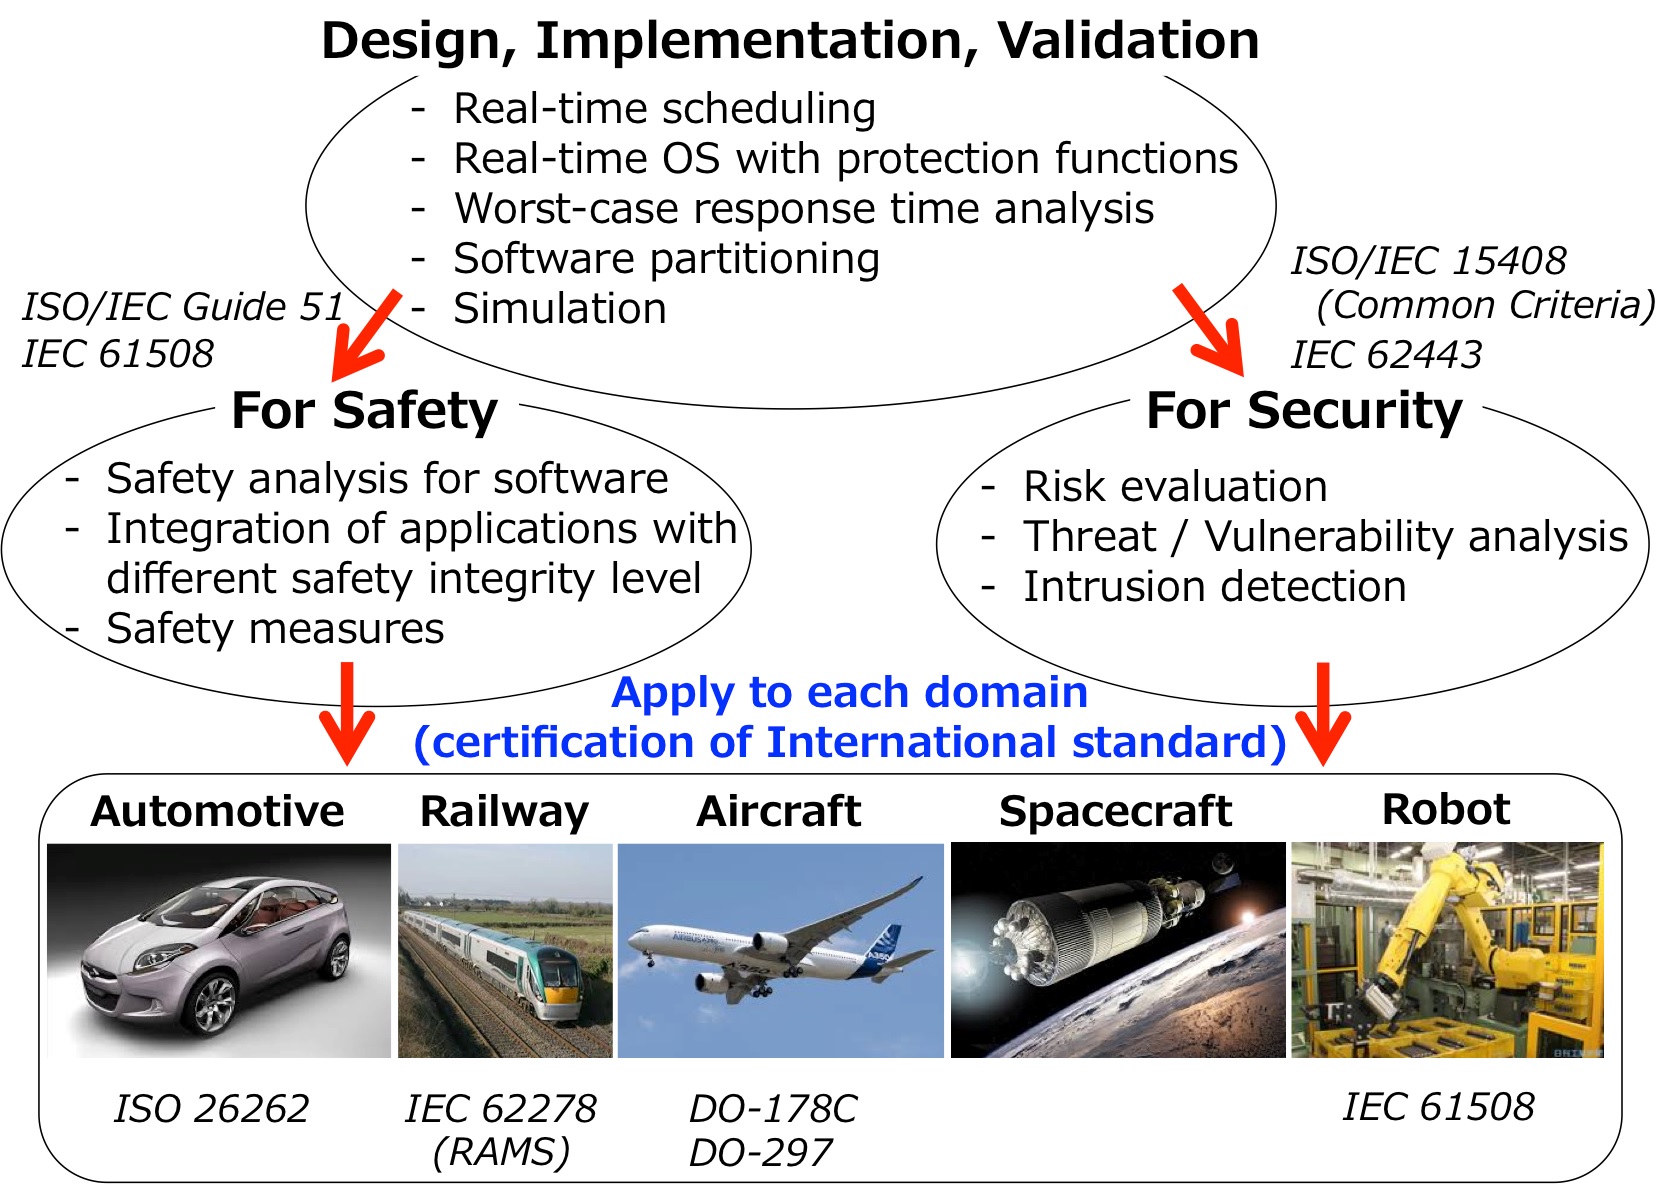 Design and development methods for embedded system safety and security